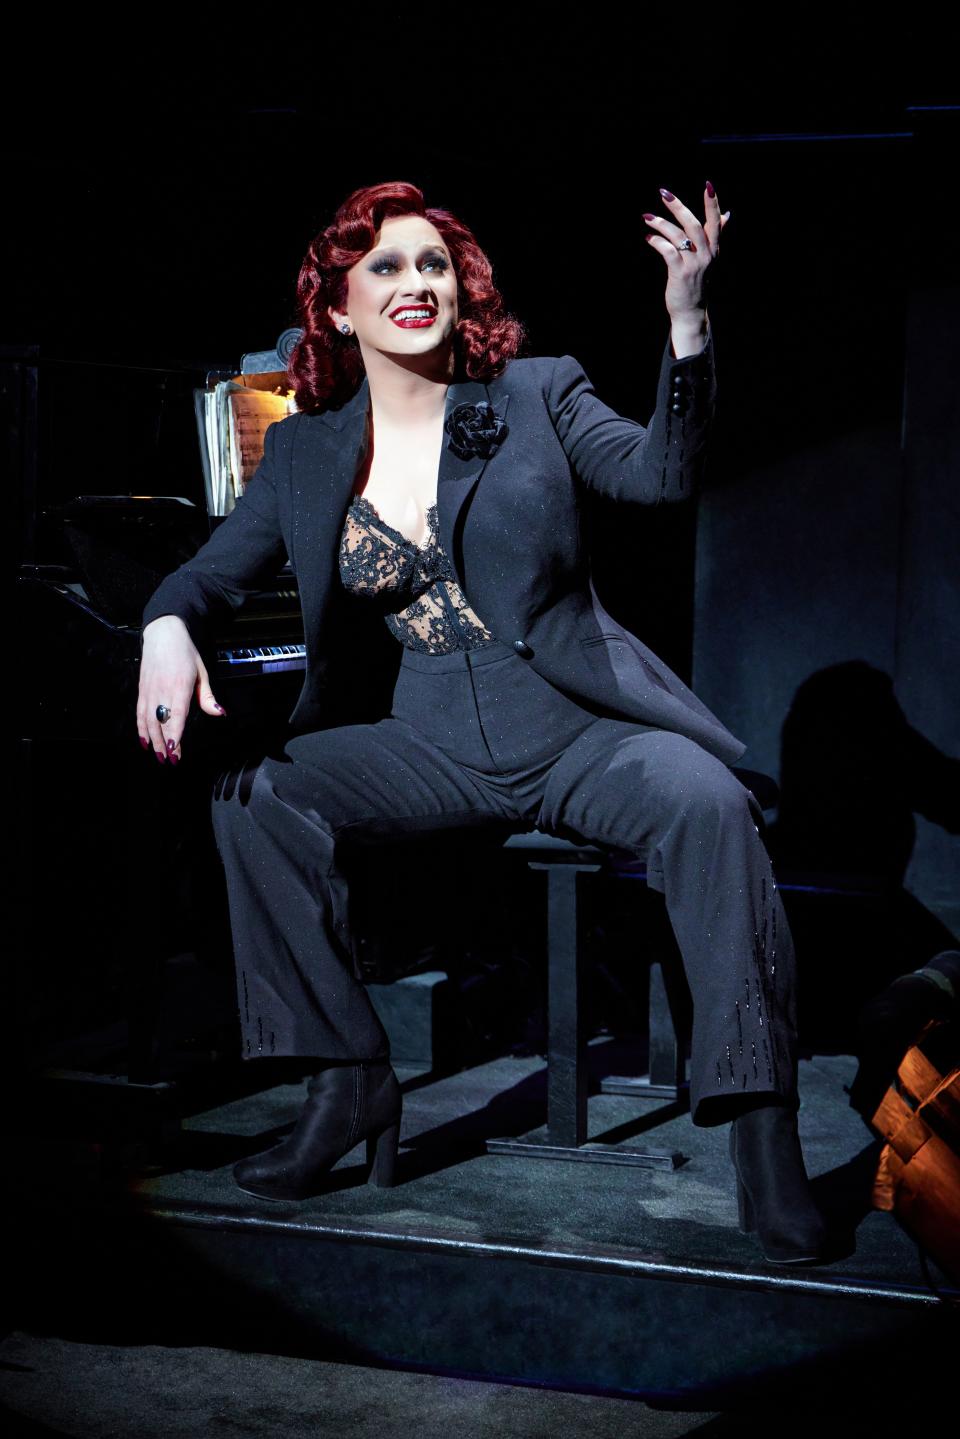 Jinkx Monsoon, two-time "RuPaul's Drag Race" winner, co-stars as Matron "Mama" Morton in the Broadway production of "Chicago" through March 12.